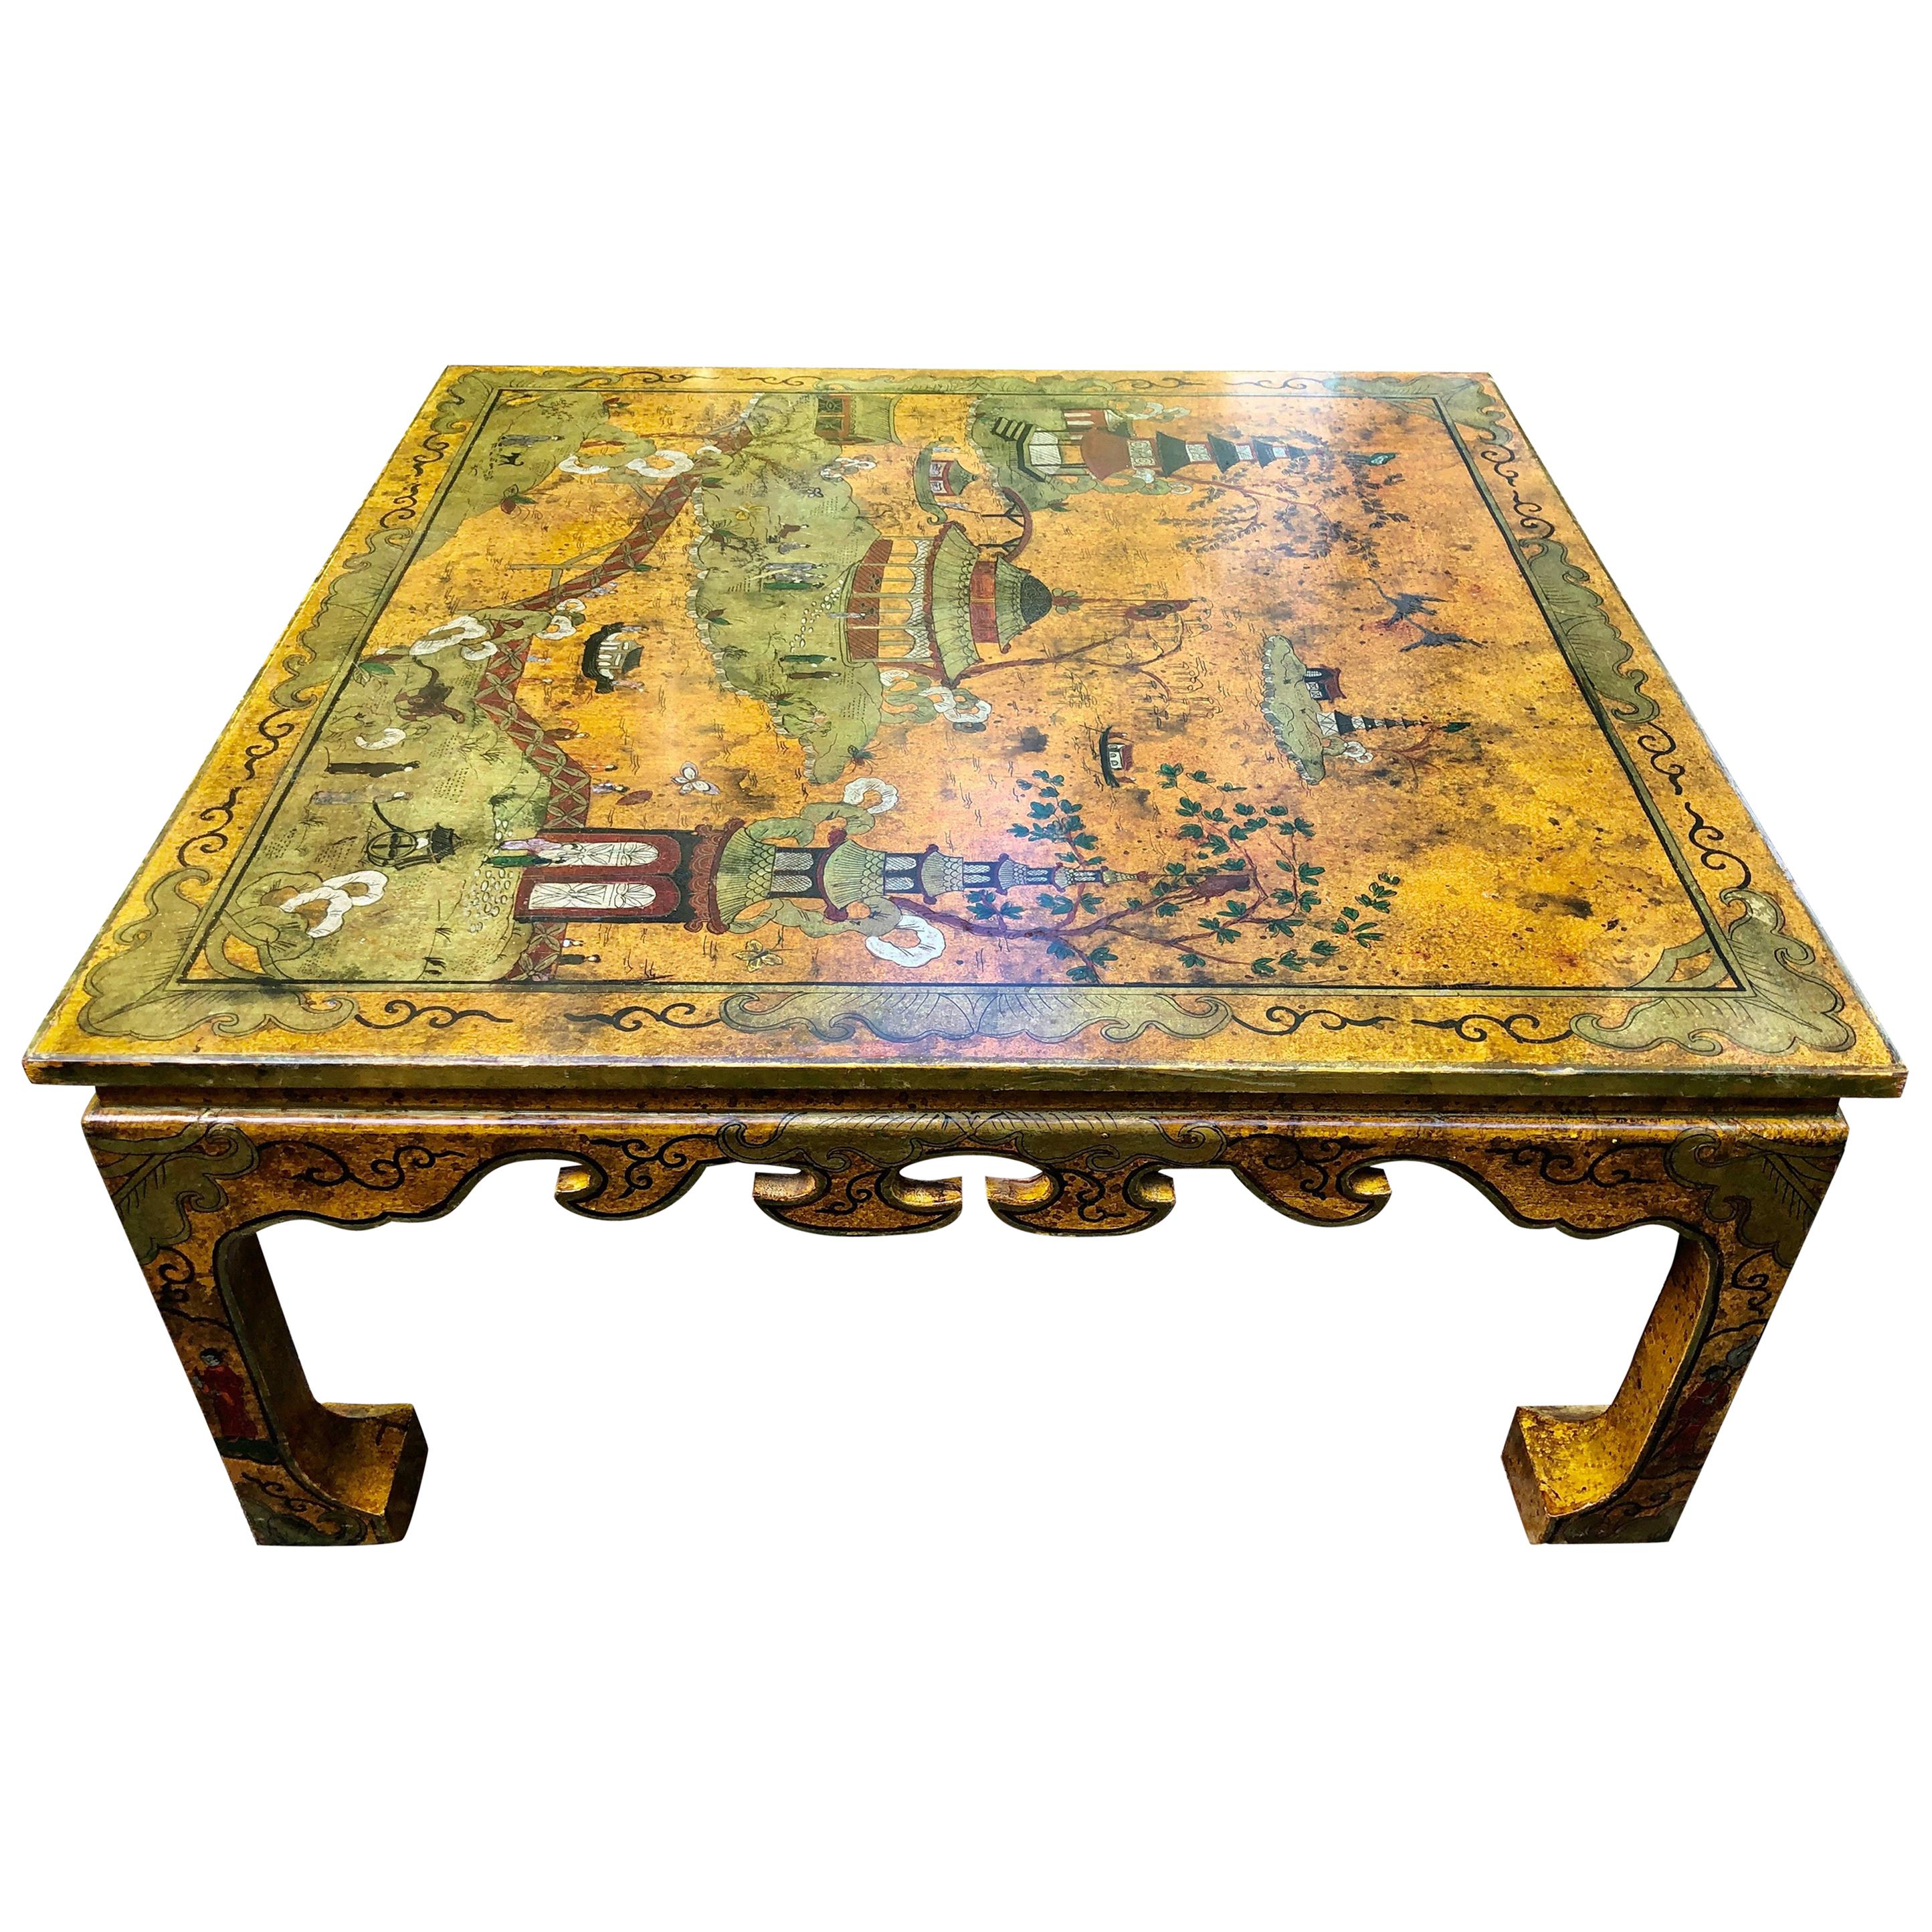 Impressive Large Square Hand Painted Chinoiserie Coffee Table